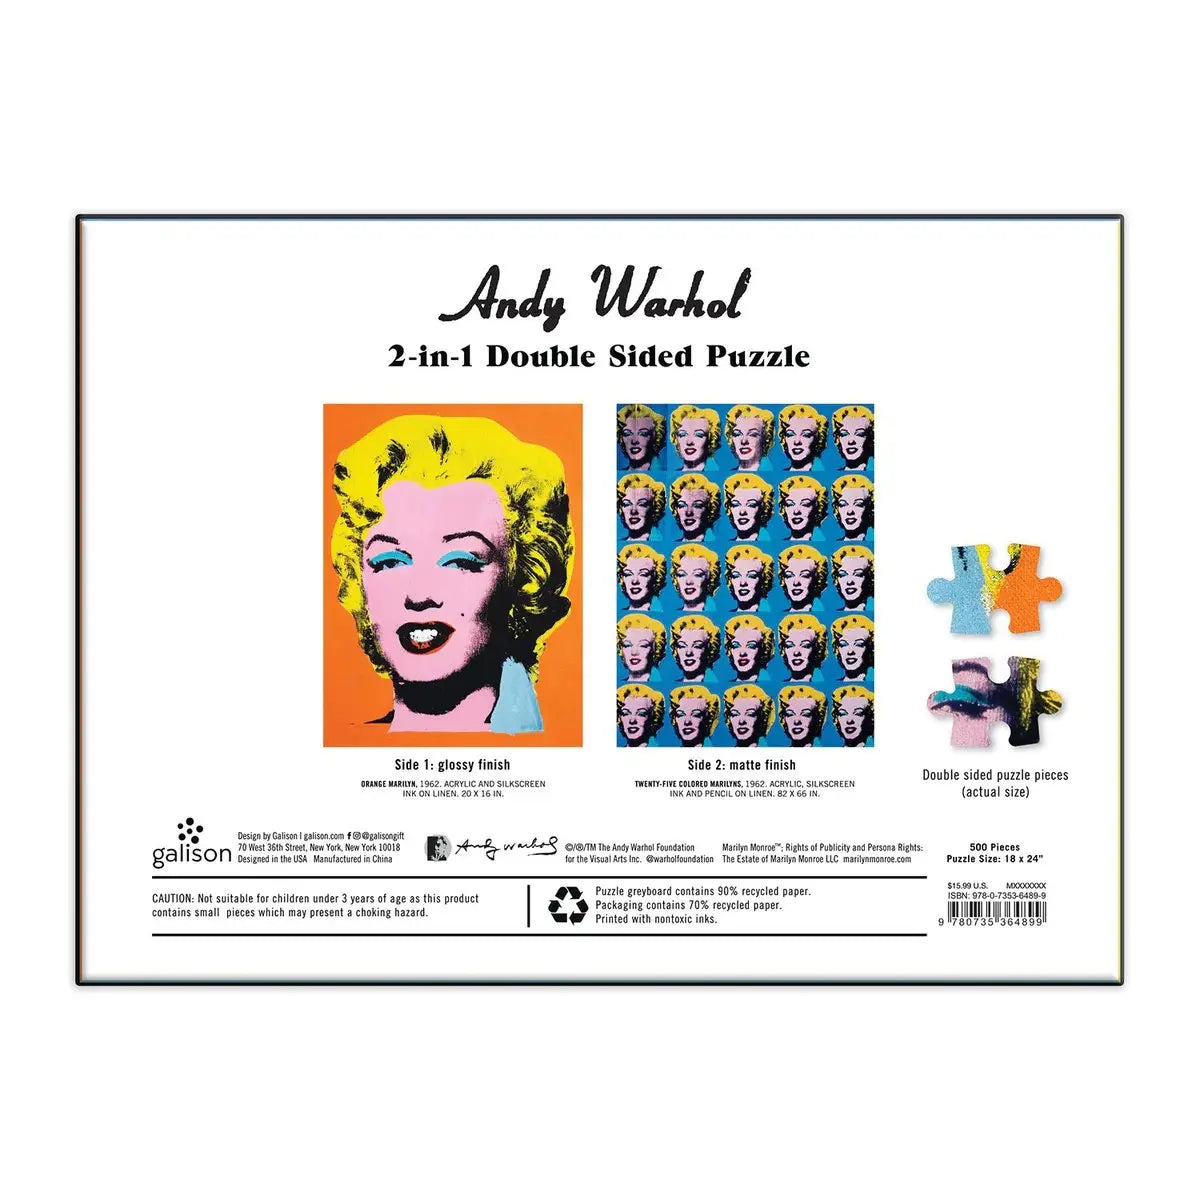 Hachette Andy Warhol Marilyn Double-Sided Jigsaw Puzzle 500 Piece, Side one glossy finish. Orange Marilyn, 1962, acrylic and silkscreen ink on linen. twenty by sixteen inches. Side two matte finish. Twenty five colored marilyns 1962 acrylic silkscreen ink and pencil on linen. eighty two by sixty six inches. Souble sided puzzle pieces with image showing actual size of the puzzle piece. Five hundred pieces.